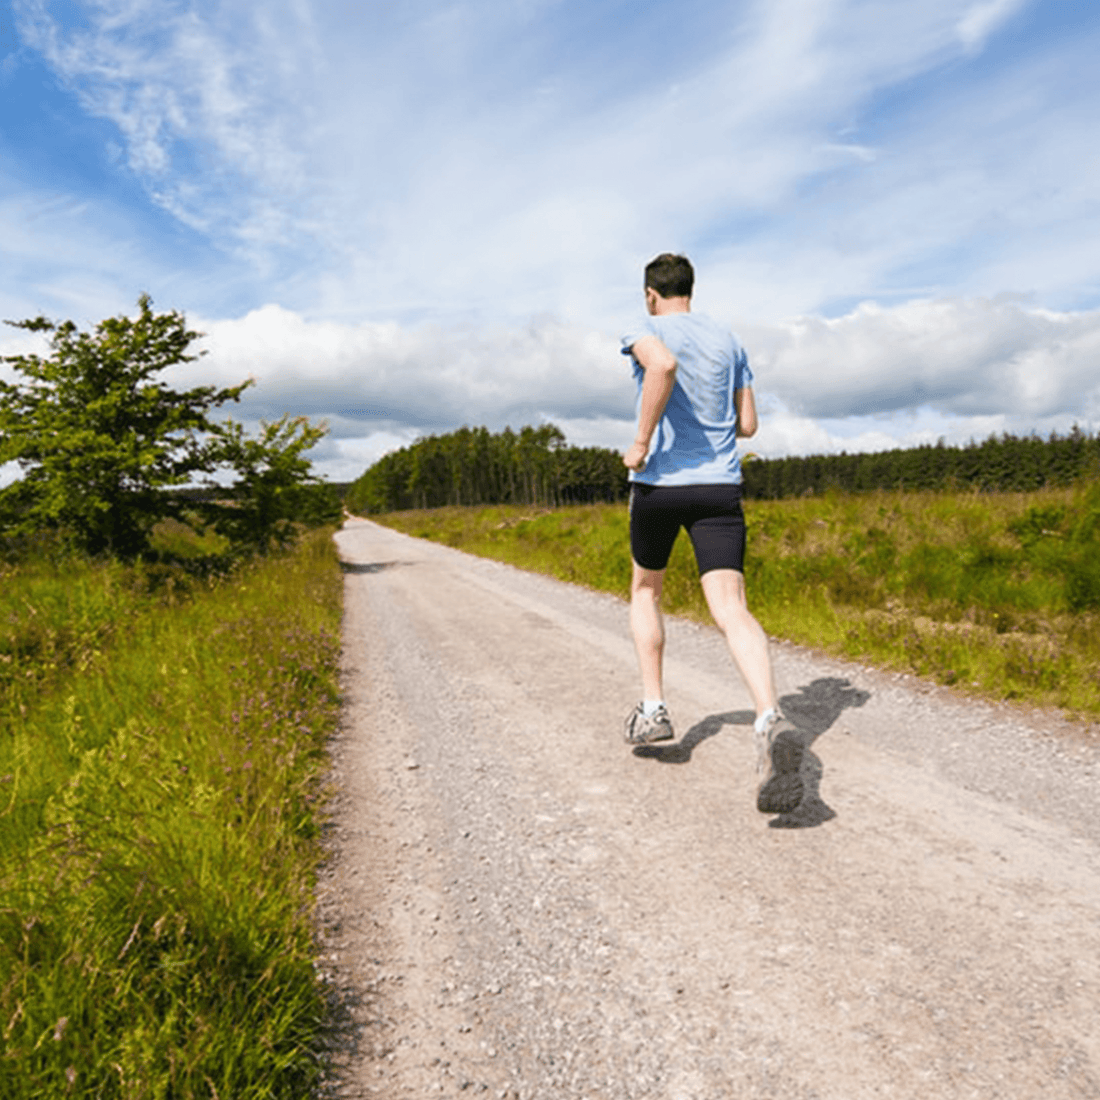 10 Reasons Why You Should Exercise in the Morning - Fitness Health 